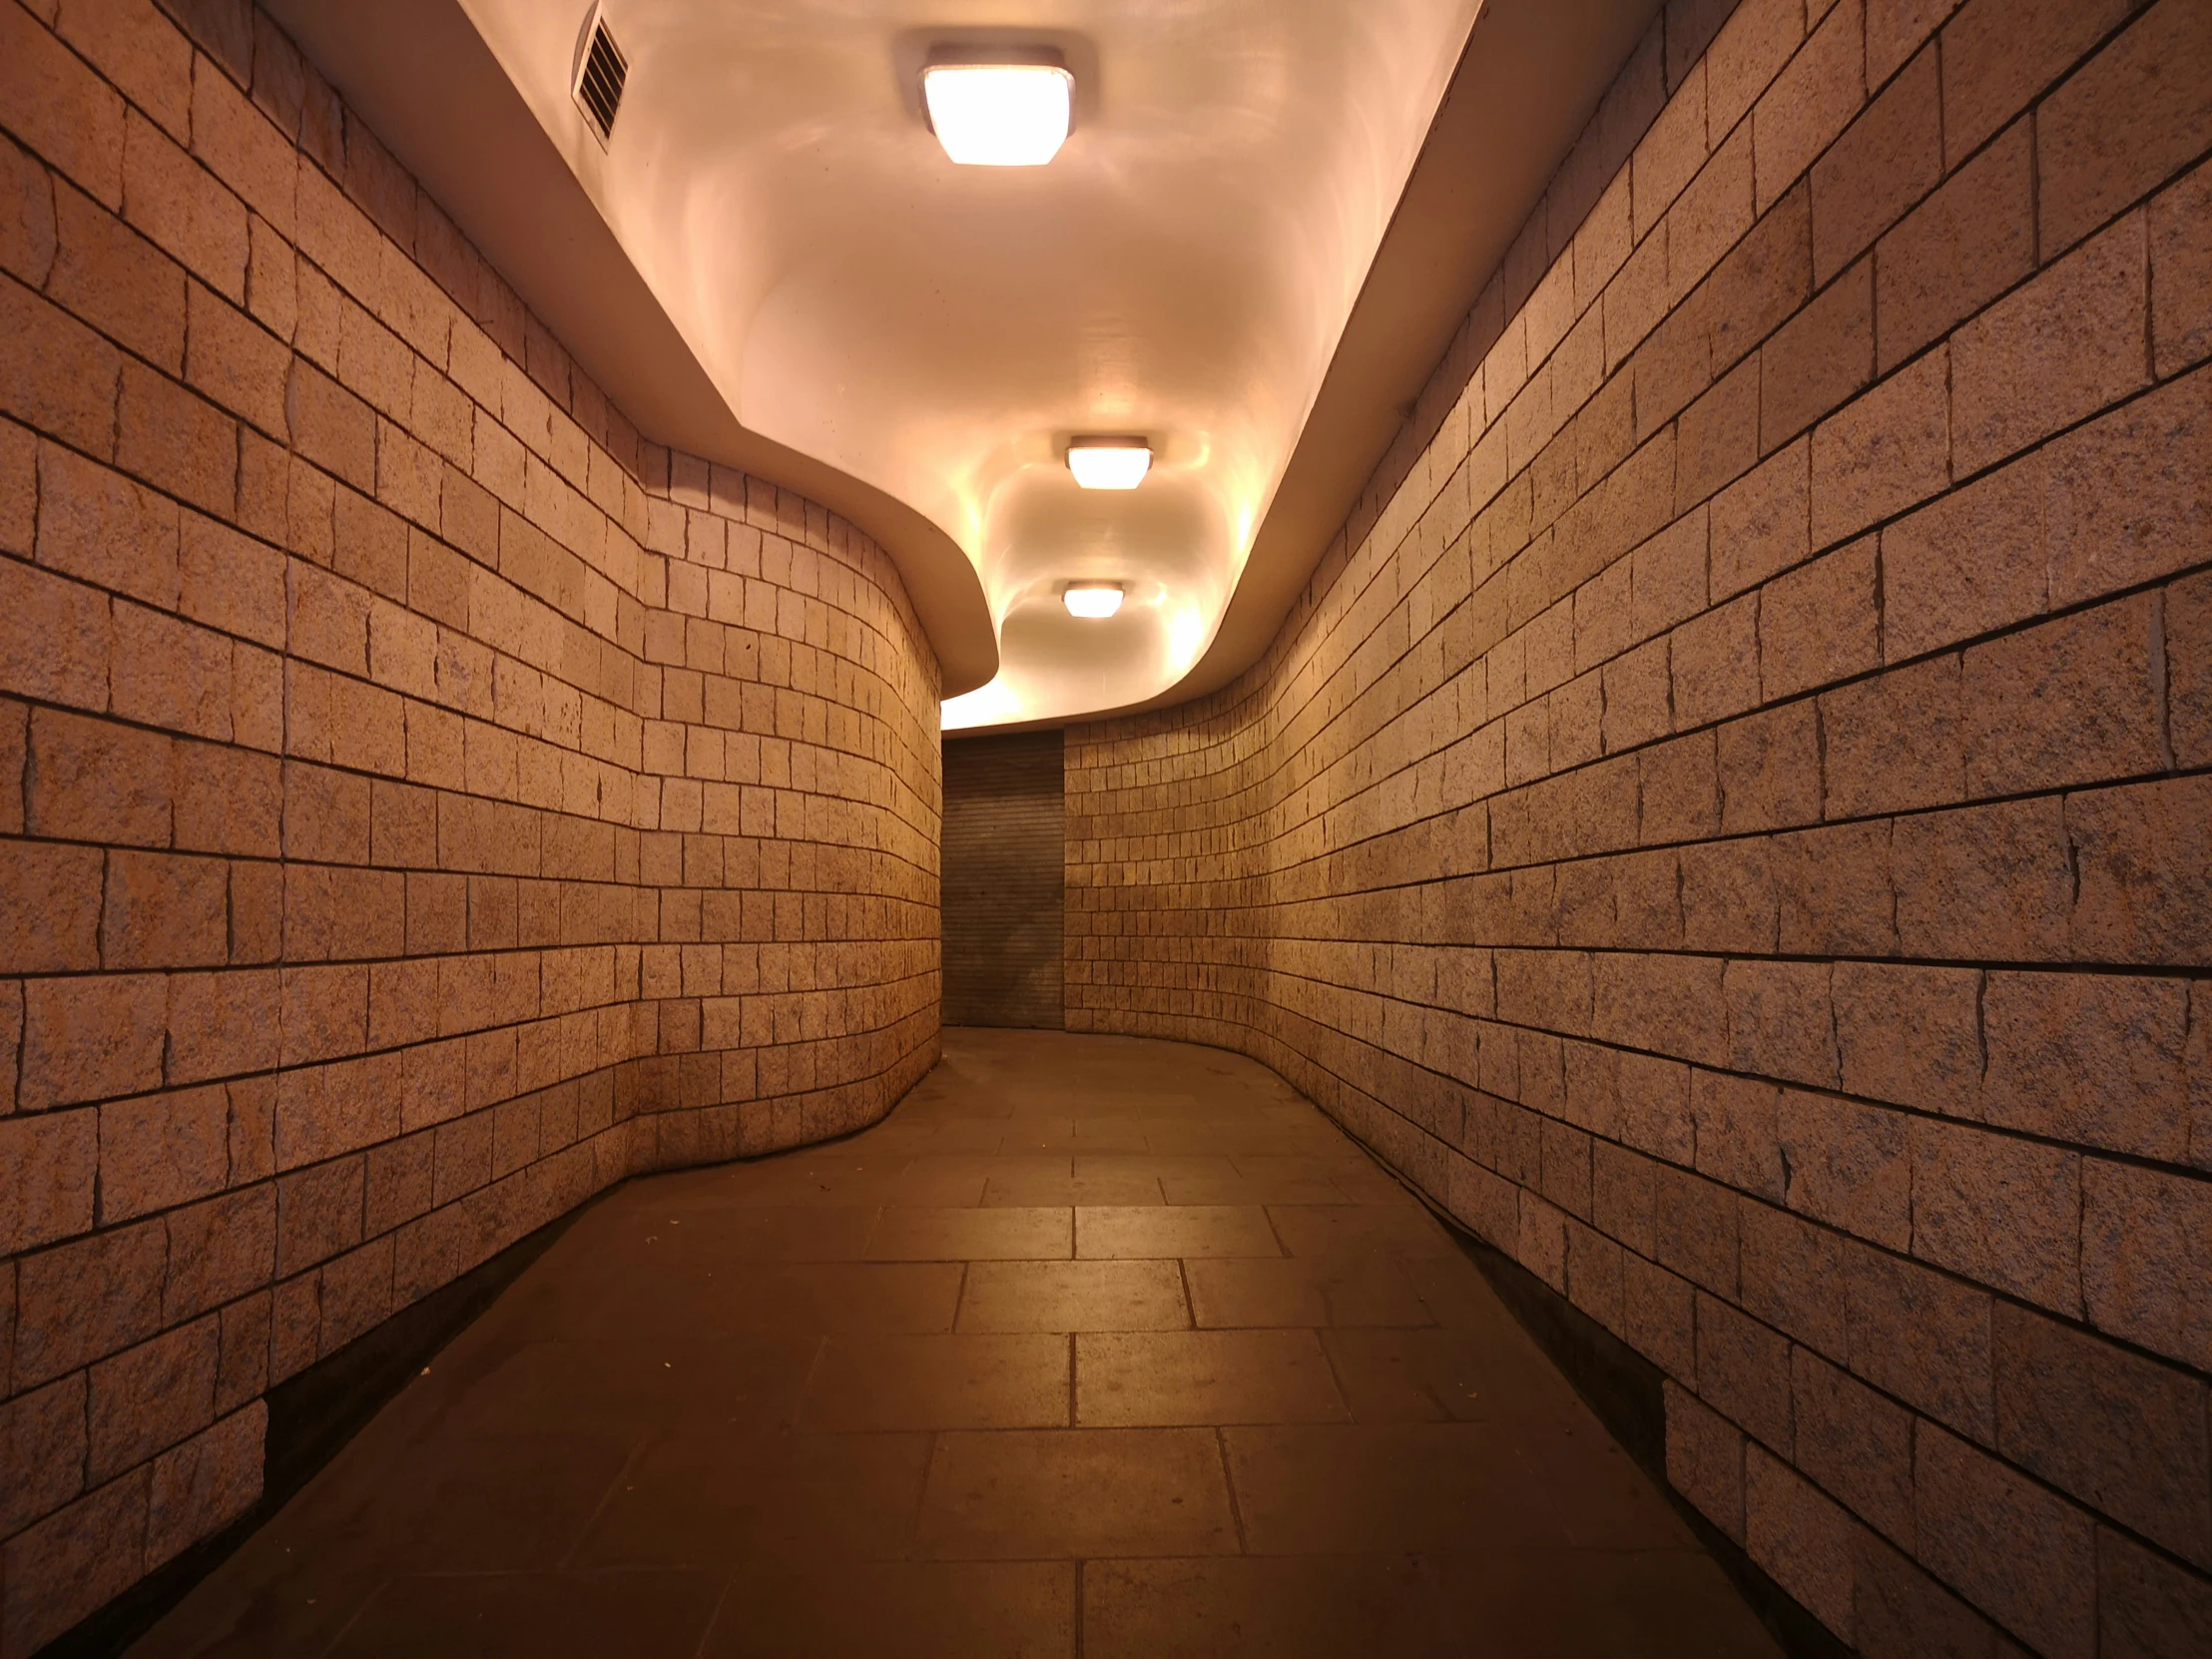 an image of an empty hallway at night